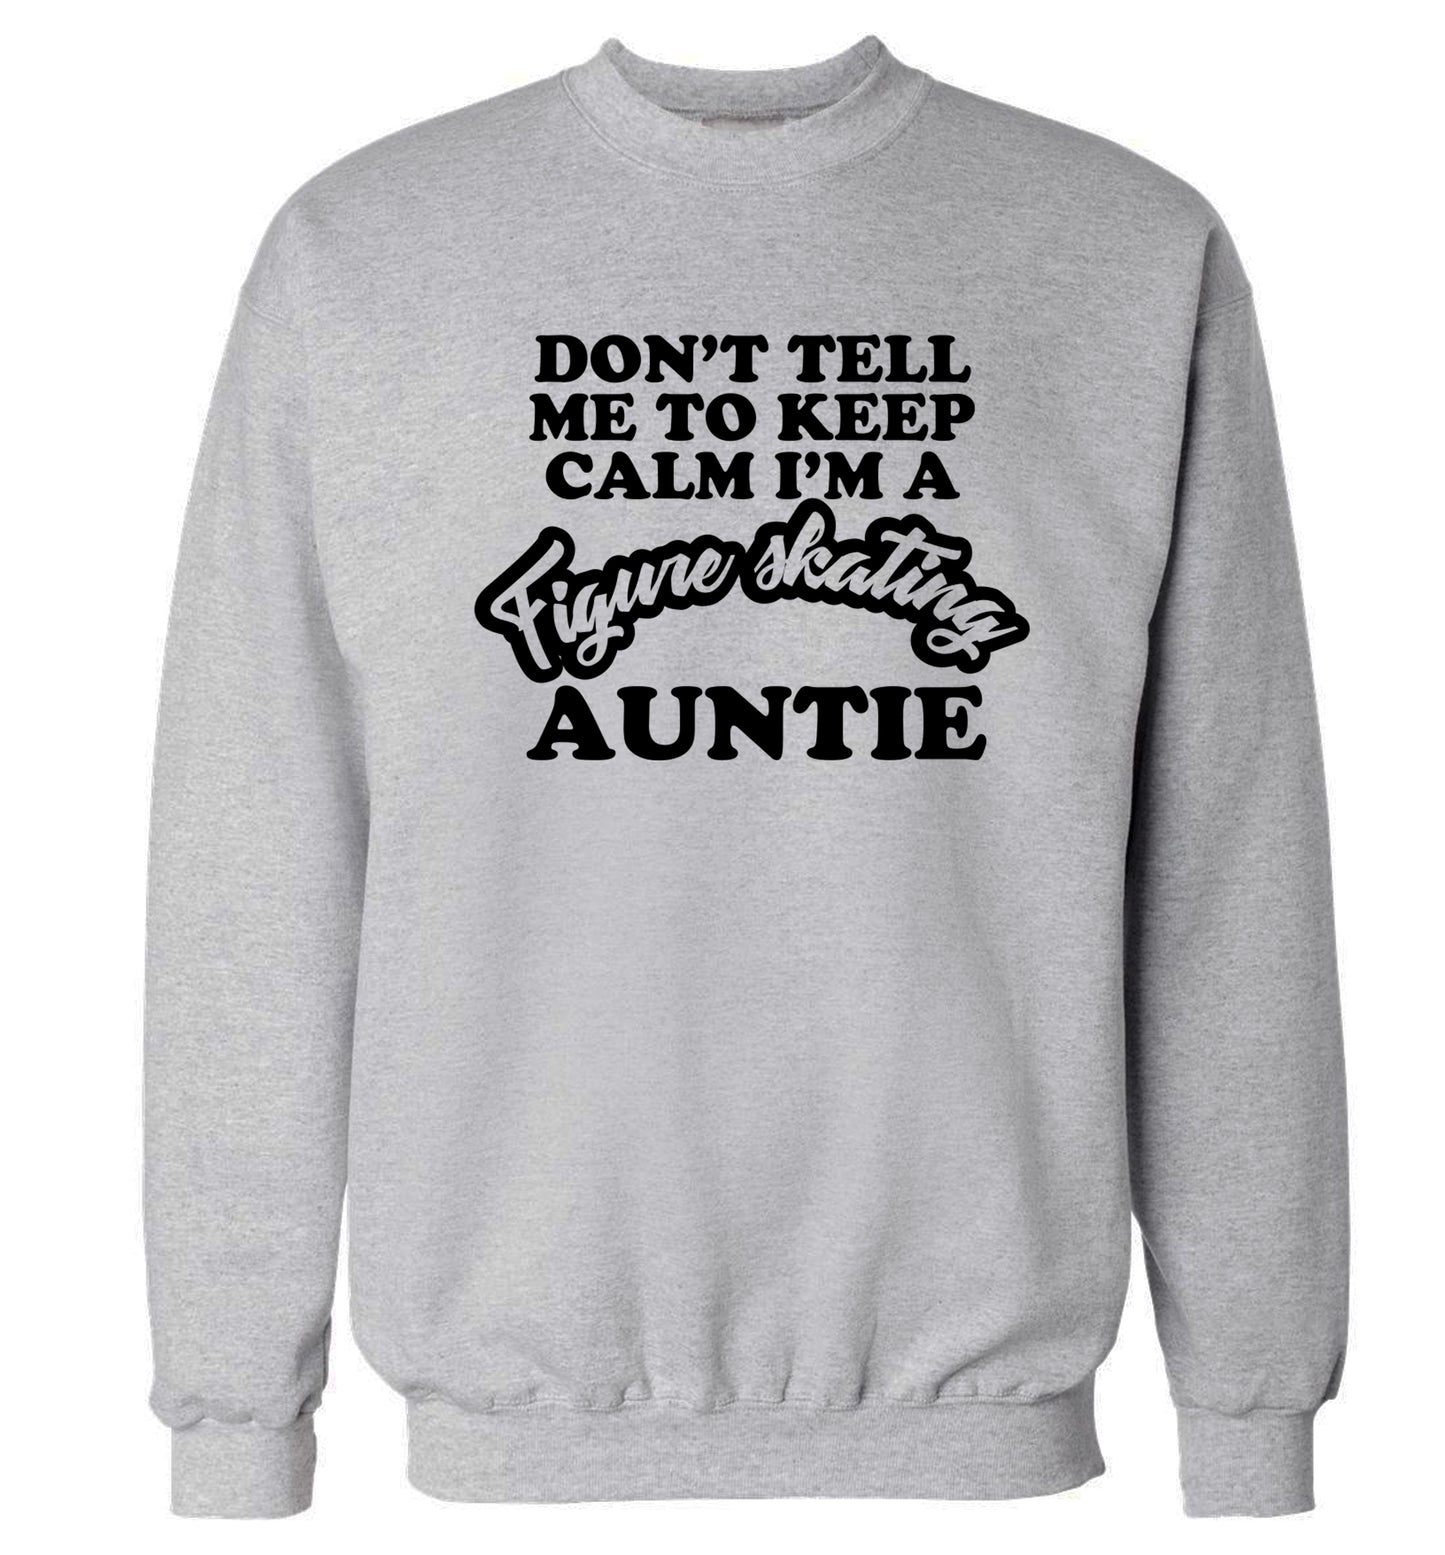 Don't tell me to keep calm I'm a figure skating auntie Adult's unisexgrey Sweater 2XL